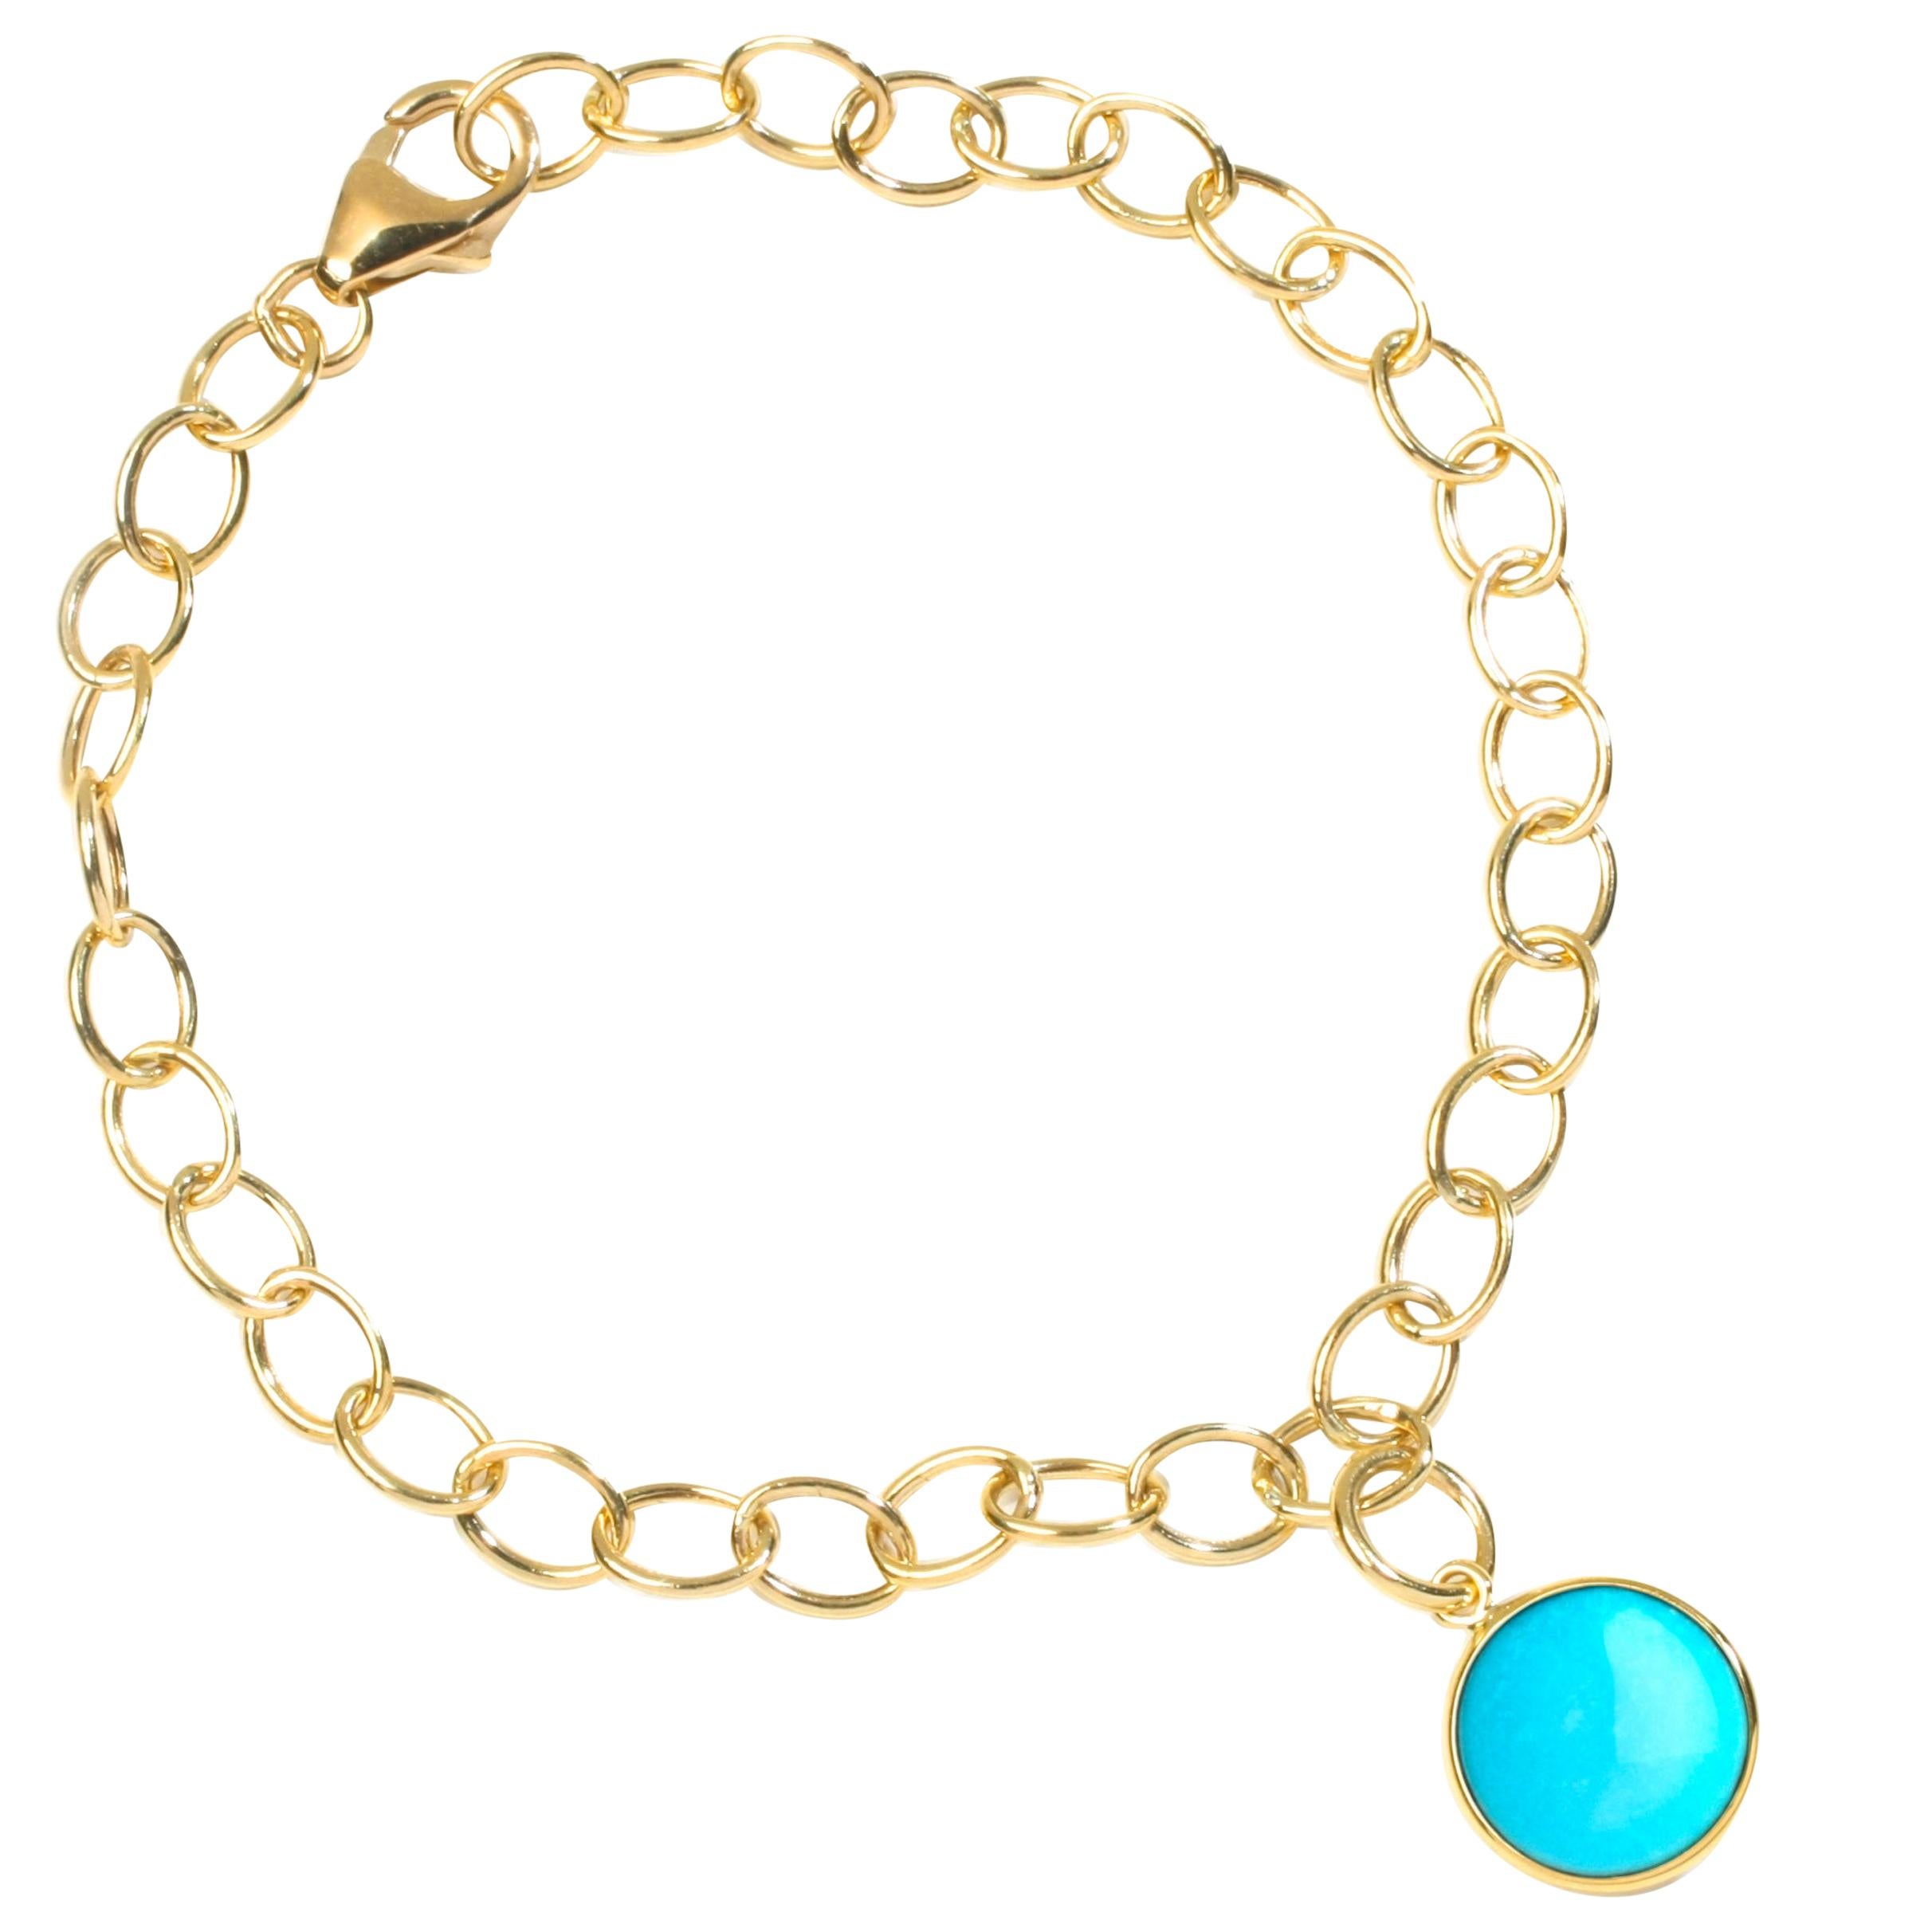 Syna Yellow Gold Bracelet with Sleeping Beauty Turquoise